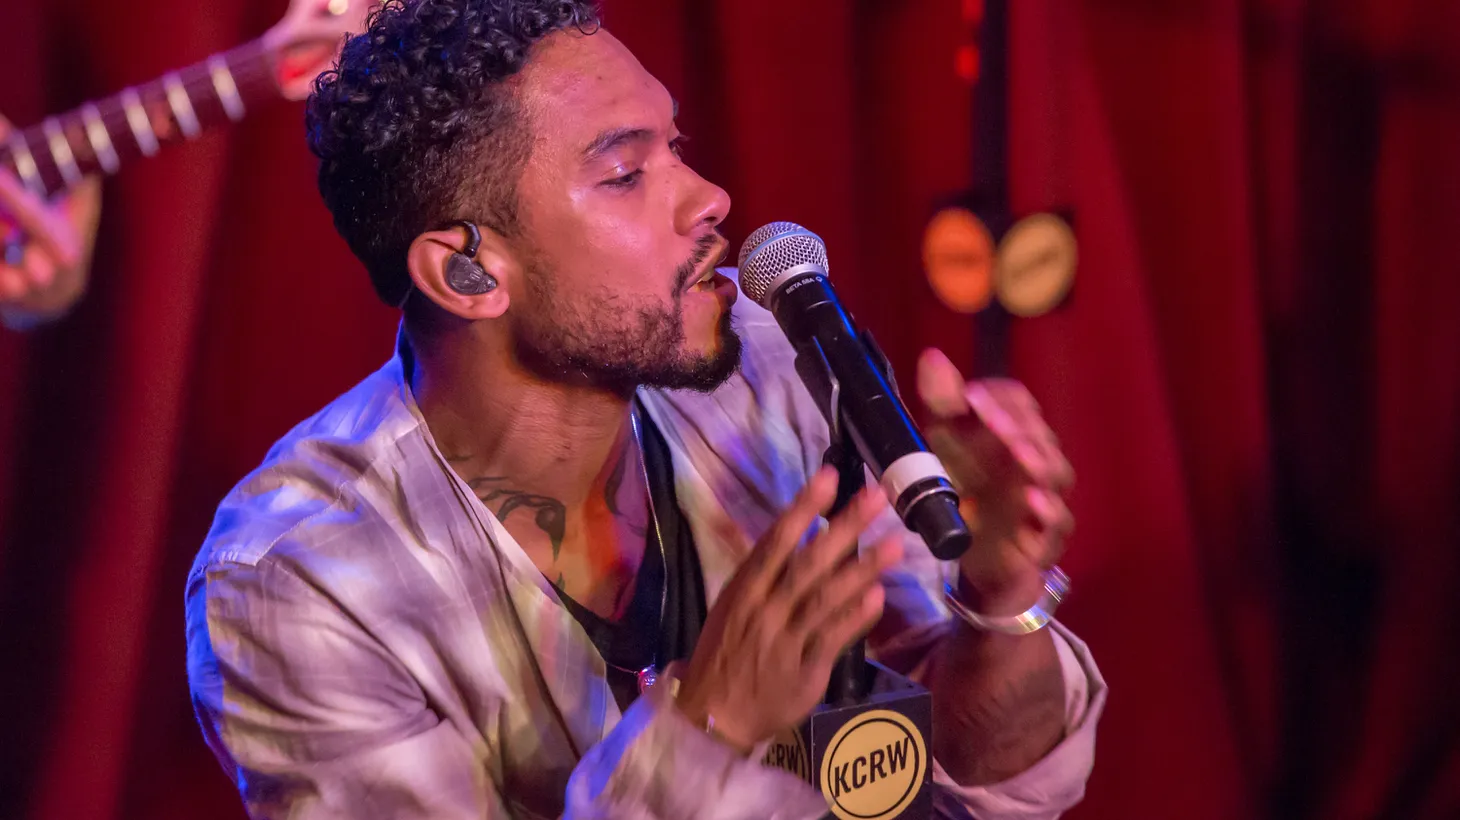 Miguel is a proud LA native whose seductive hybrid of R&B and soul and boundary-pushing experimentation has earned him comparisons to Prince and cemented his role as a creative force in music today – and likely many years to come.